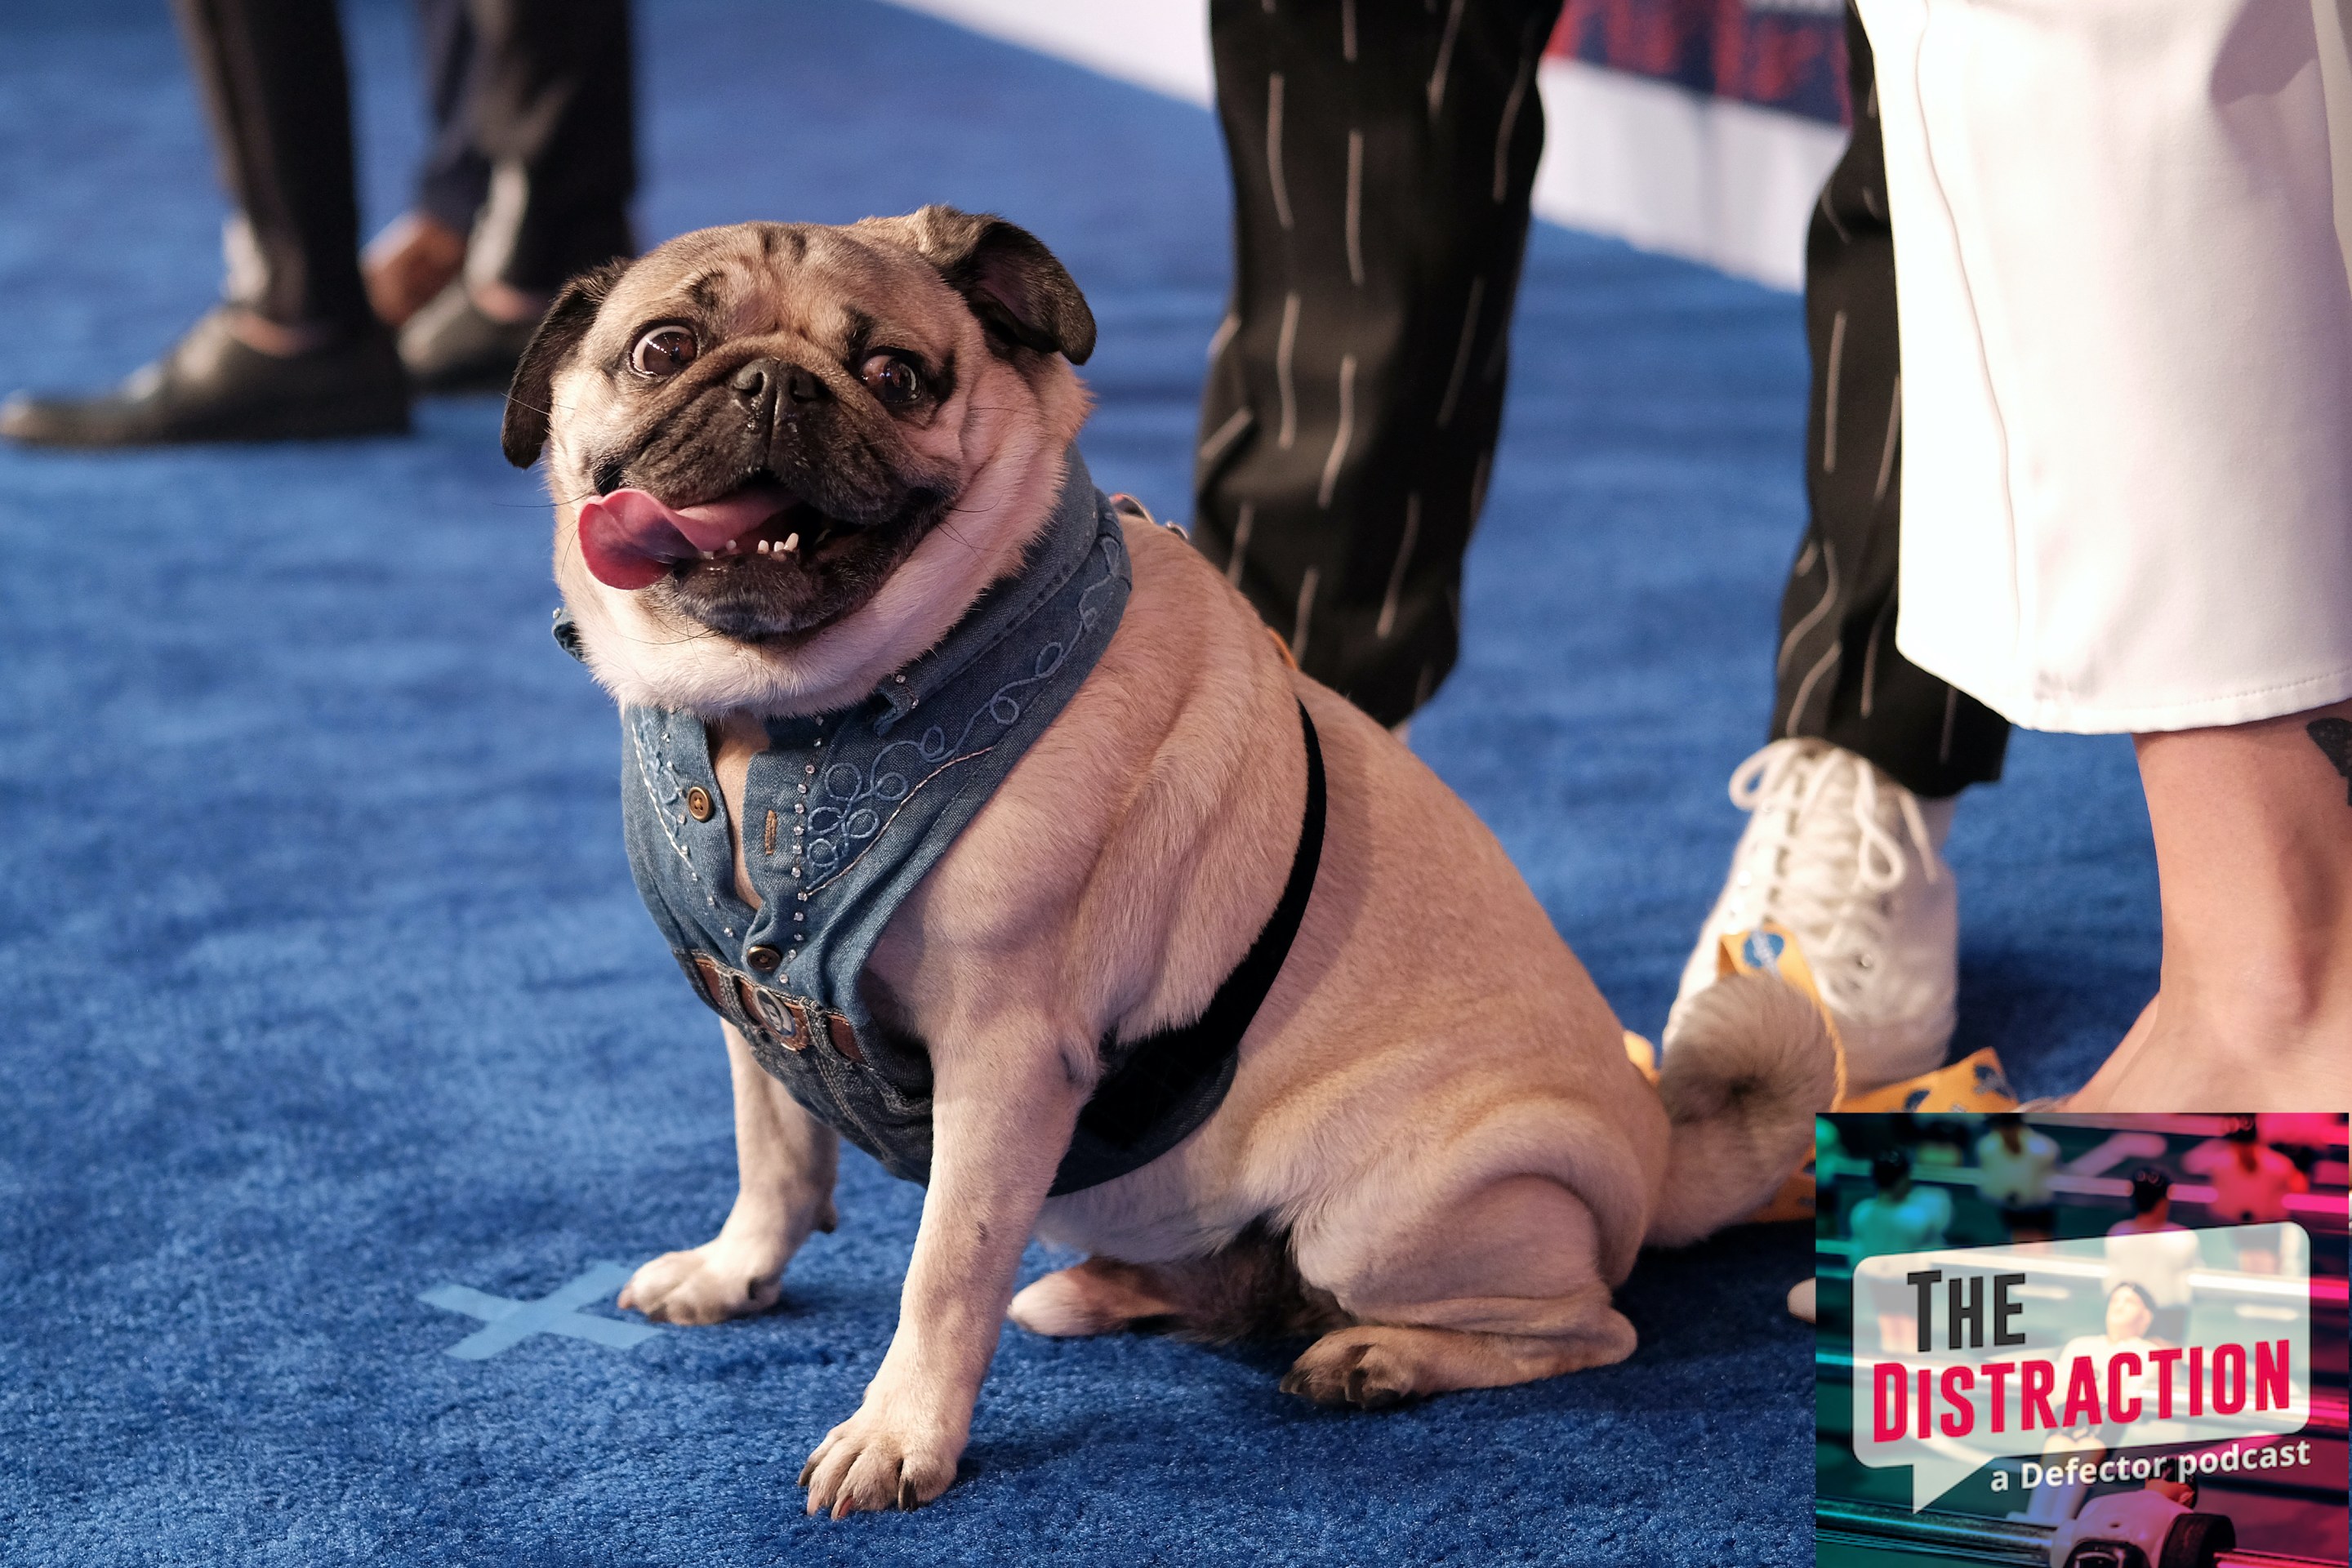 This is a photo of a dog named Doug The Pug at a Country Music Television event. Delightful!